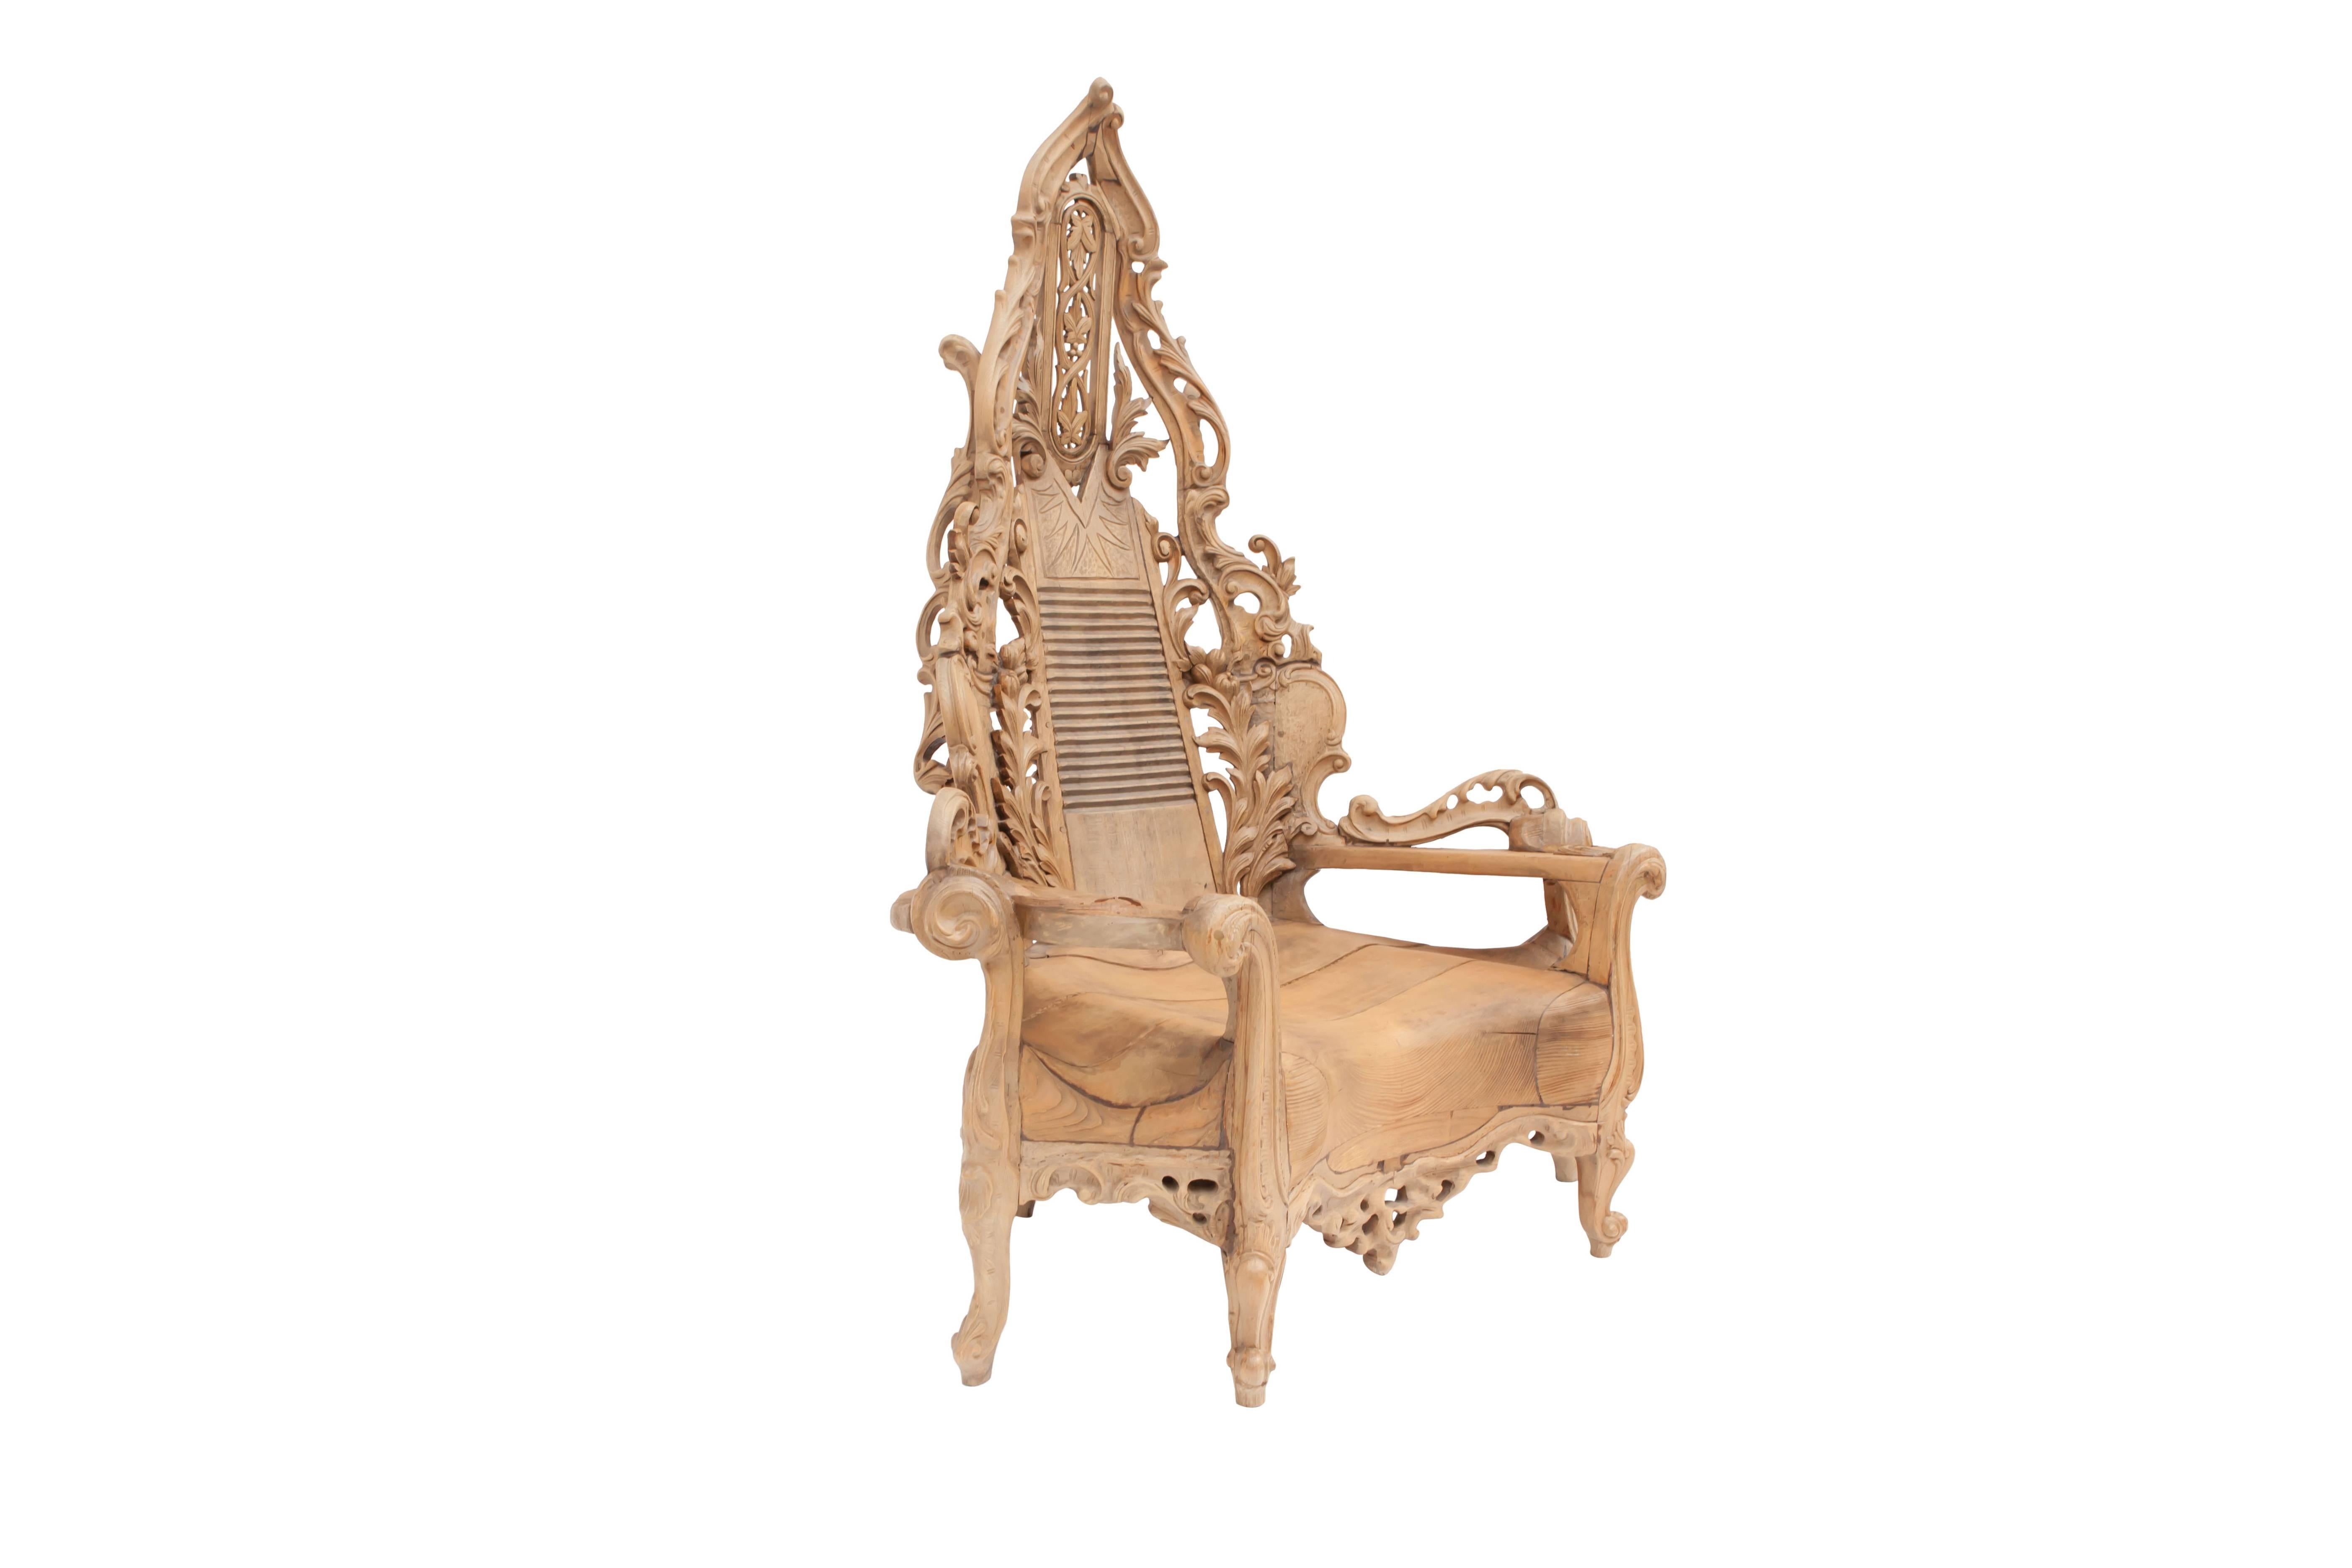 Sculptural hand carved wooden throne or lounge chair, impressive in design and size.
Rare hand carved by a late French Brettonian artist in mid-20th century.
An eye-catching conversation piece in many interiors.
Measures: H 166 cm D 79 cm W 126